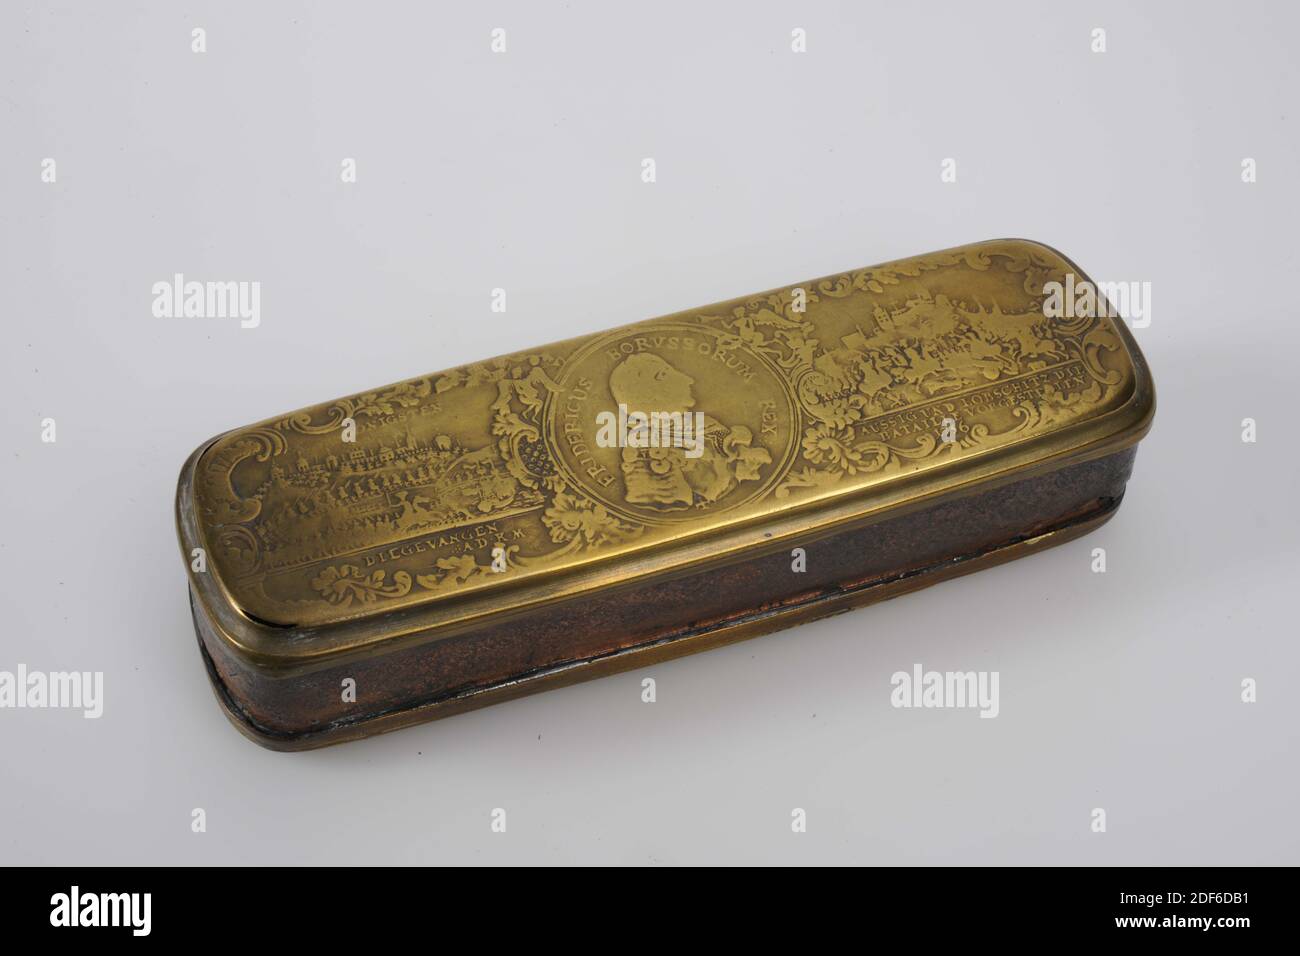 tobacco box, Anonymous, 18th century, General: 3.4 x 15.2 x 5cm (34 x 152 x 50mm), man's portrait, battle, fortress, Copper tobacco box, oblong in shape with rounded corners. The lid closes with a hinge on the long side. The lid and bottom are yellow in color. The side wall at the front is red in color. The back gray. On the top a bust of Frederick of Prussia in medallion with the edge lettering: FREDERICUS BORUSSORUM REX. On the left the fortress Königstein, on the right a battle. Below: THOSE CAUGHT AUSSIG UND LOBSCHITZ DIE BATAILLE VORGE ... AND A.D.K.M. 1756. Bottom: In the middle Poseidon Stock Photo